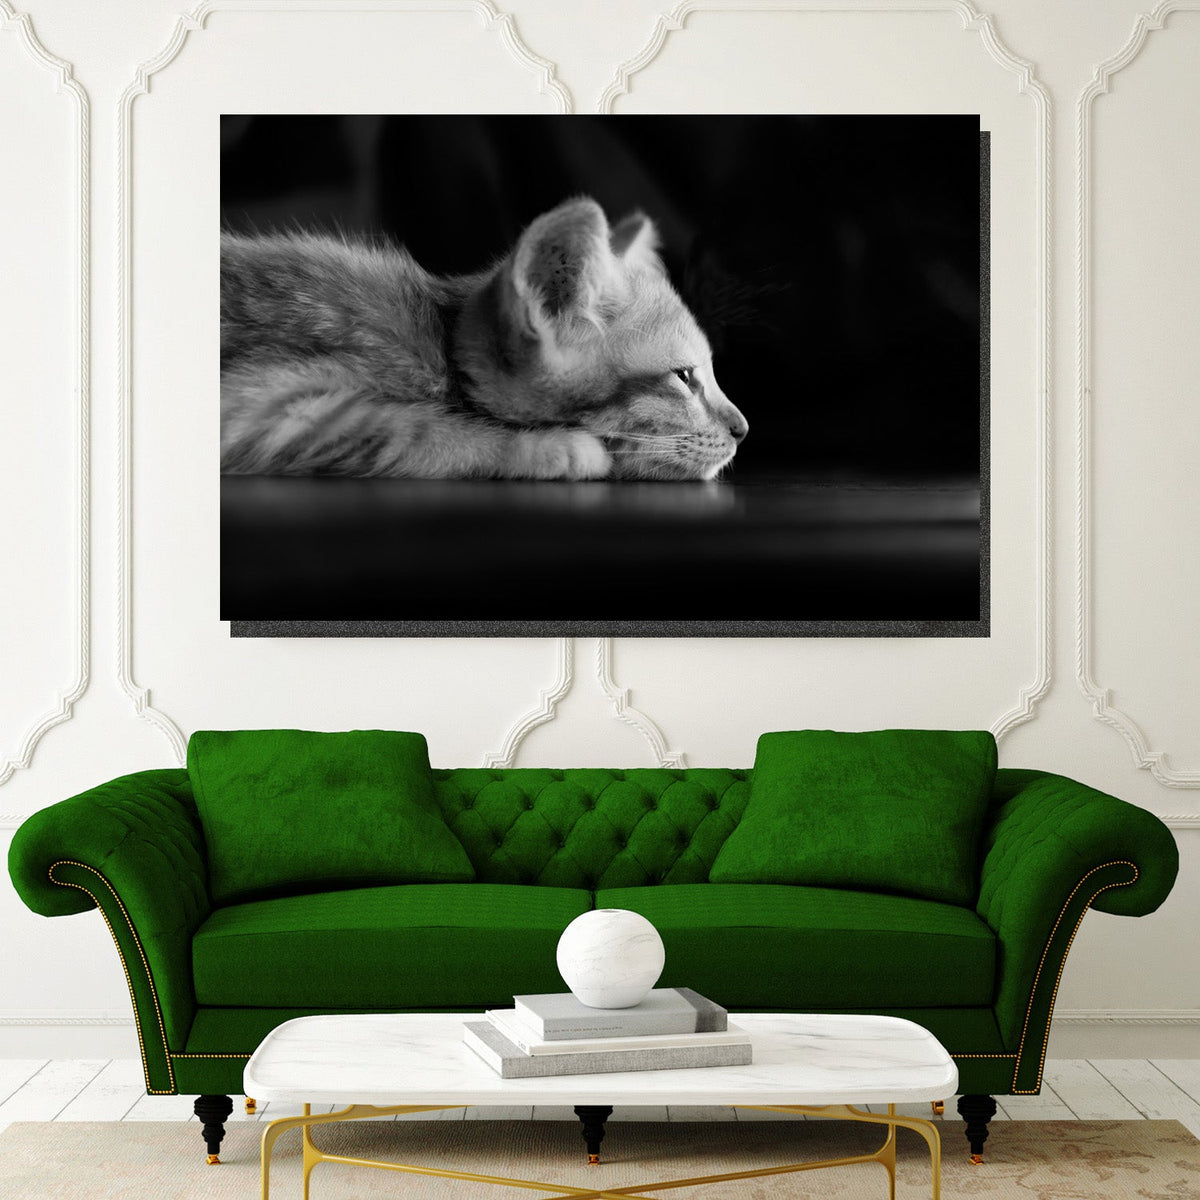 https://cdn.shopify.com/s/files/1/0387/9986/8044/products/LazyKittenCanvasArtprintStretched-4.jpg